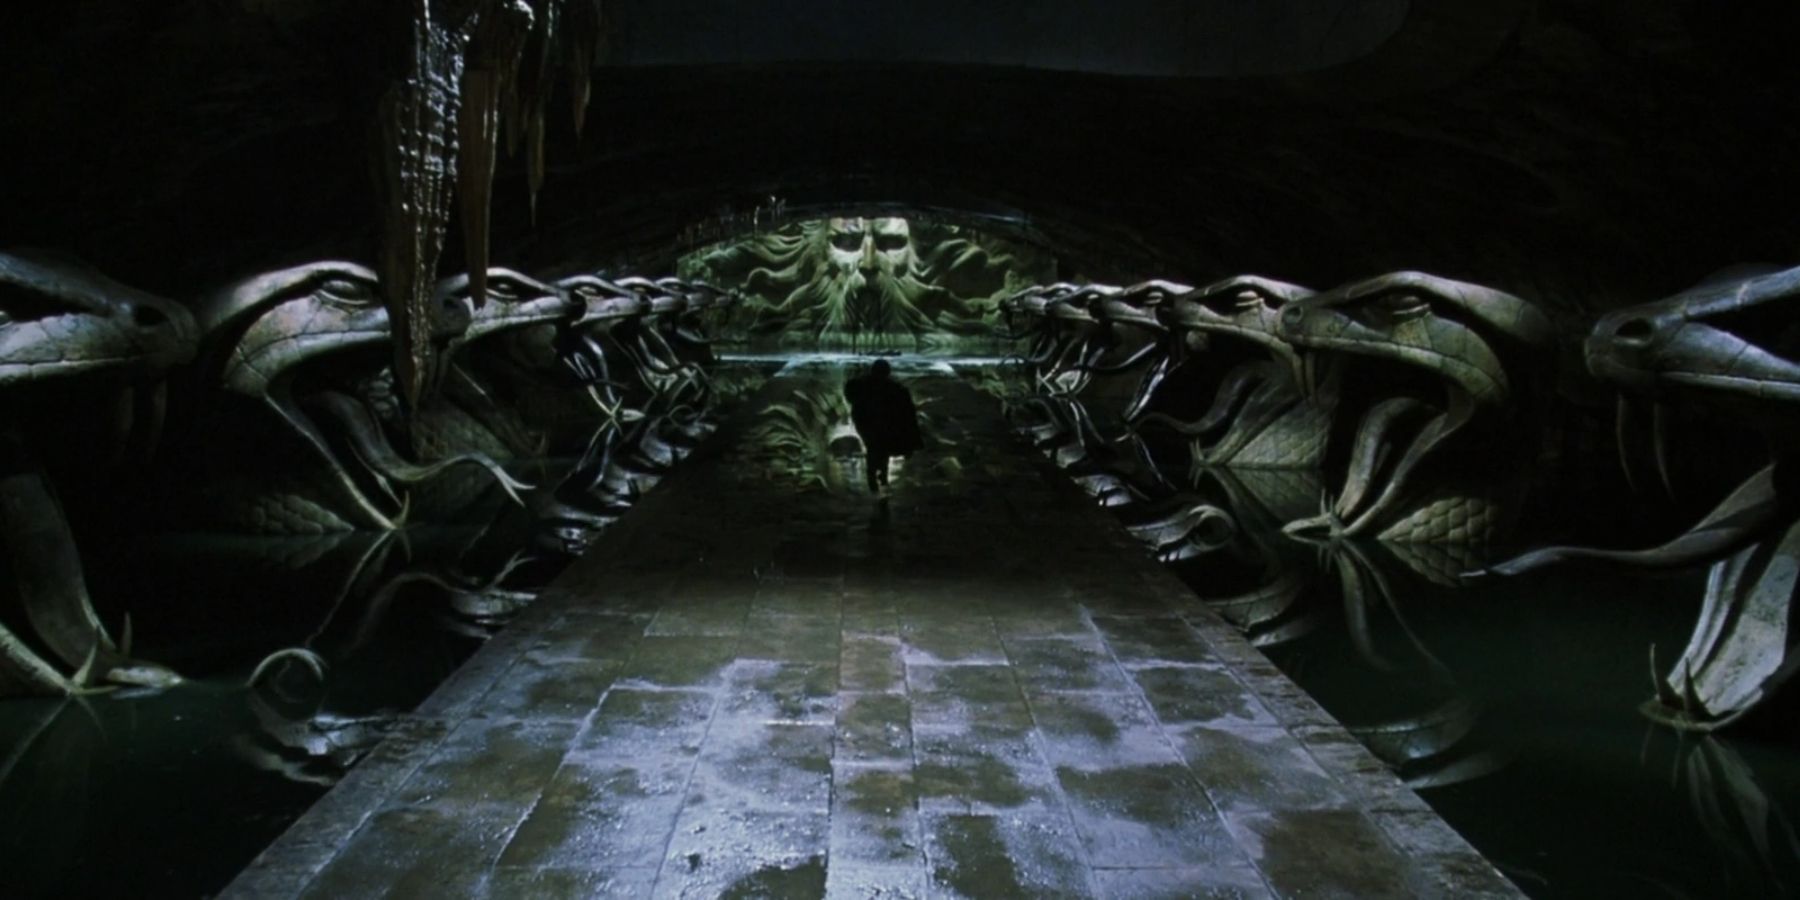 The Chamber of Secrets in Harry Potter.